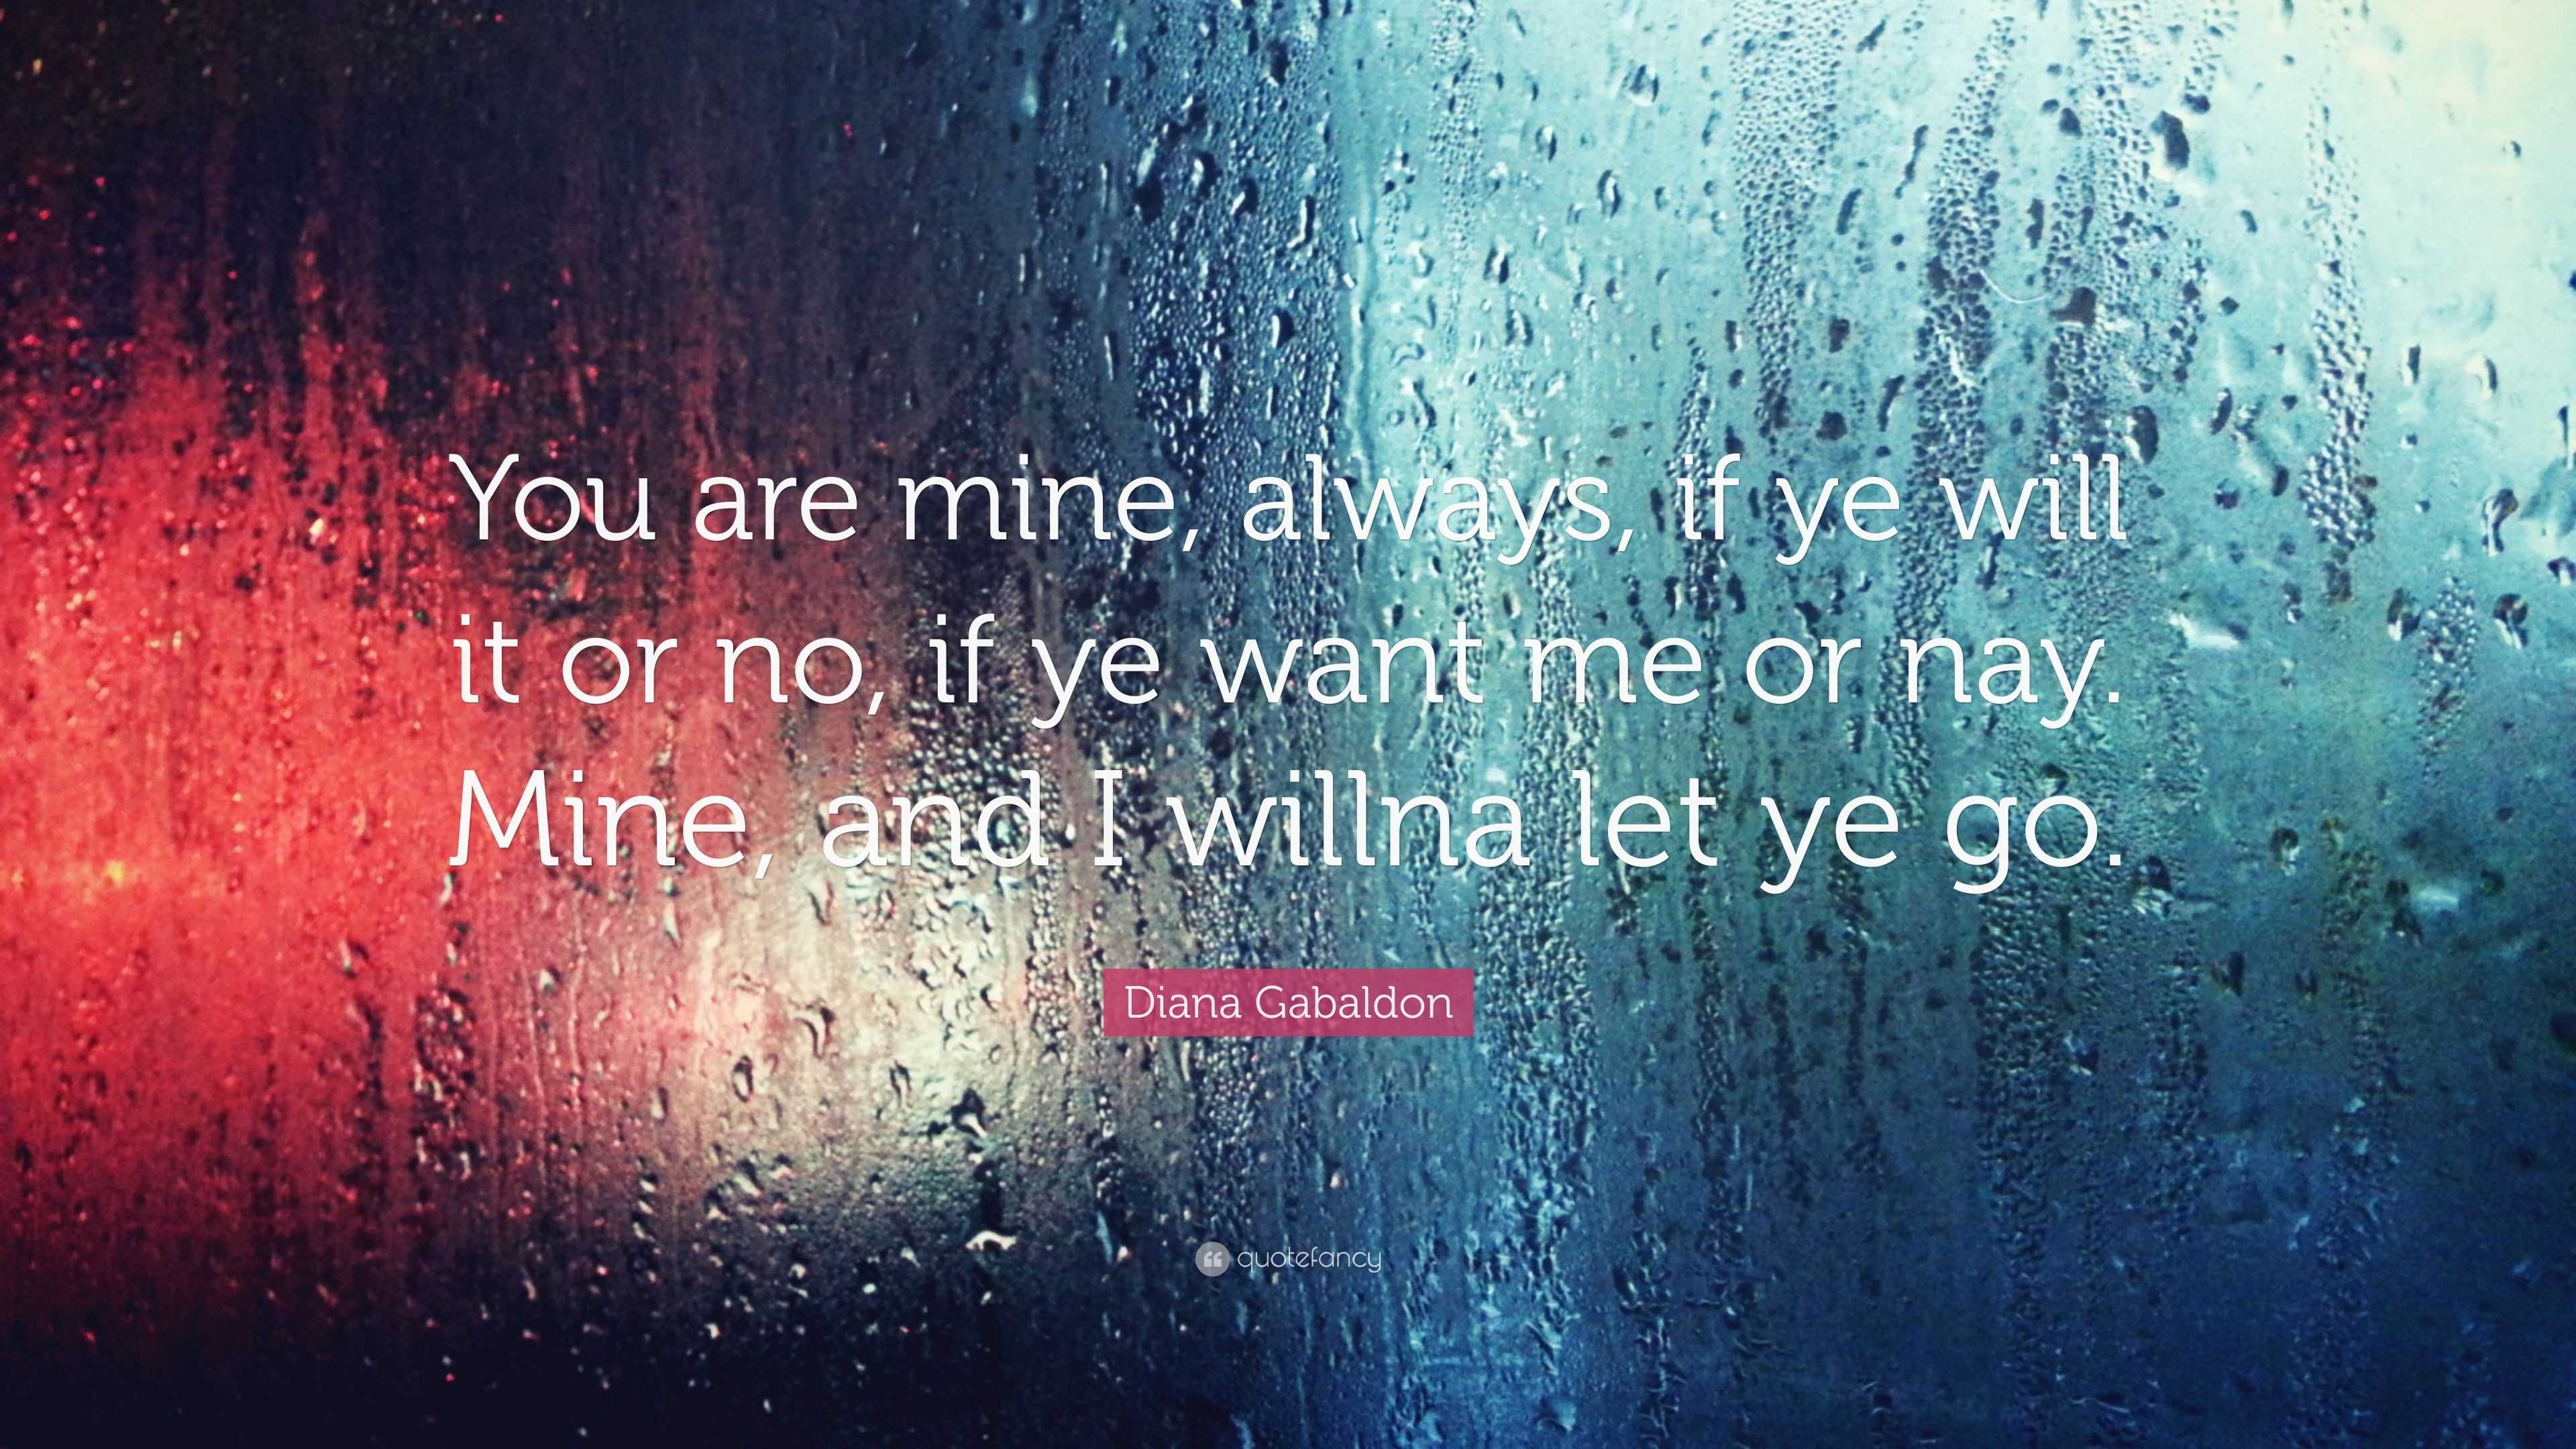 Diana Gabaldon Quote: “You are mine, always, if ye will it or no, if ye ...